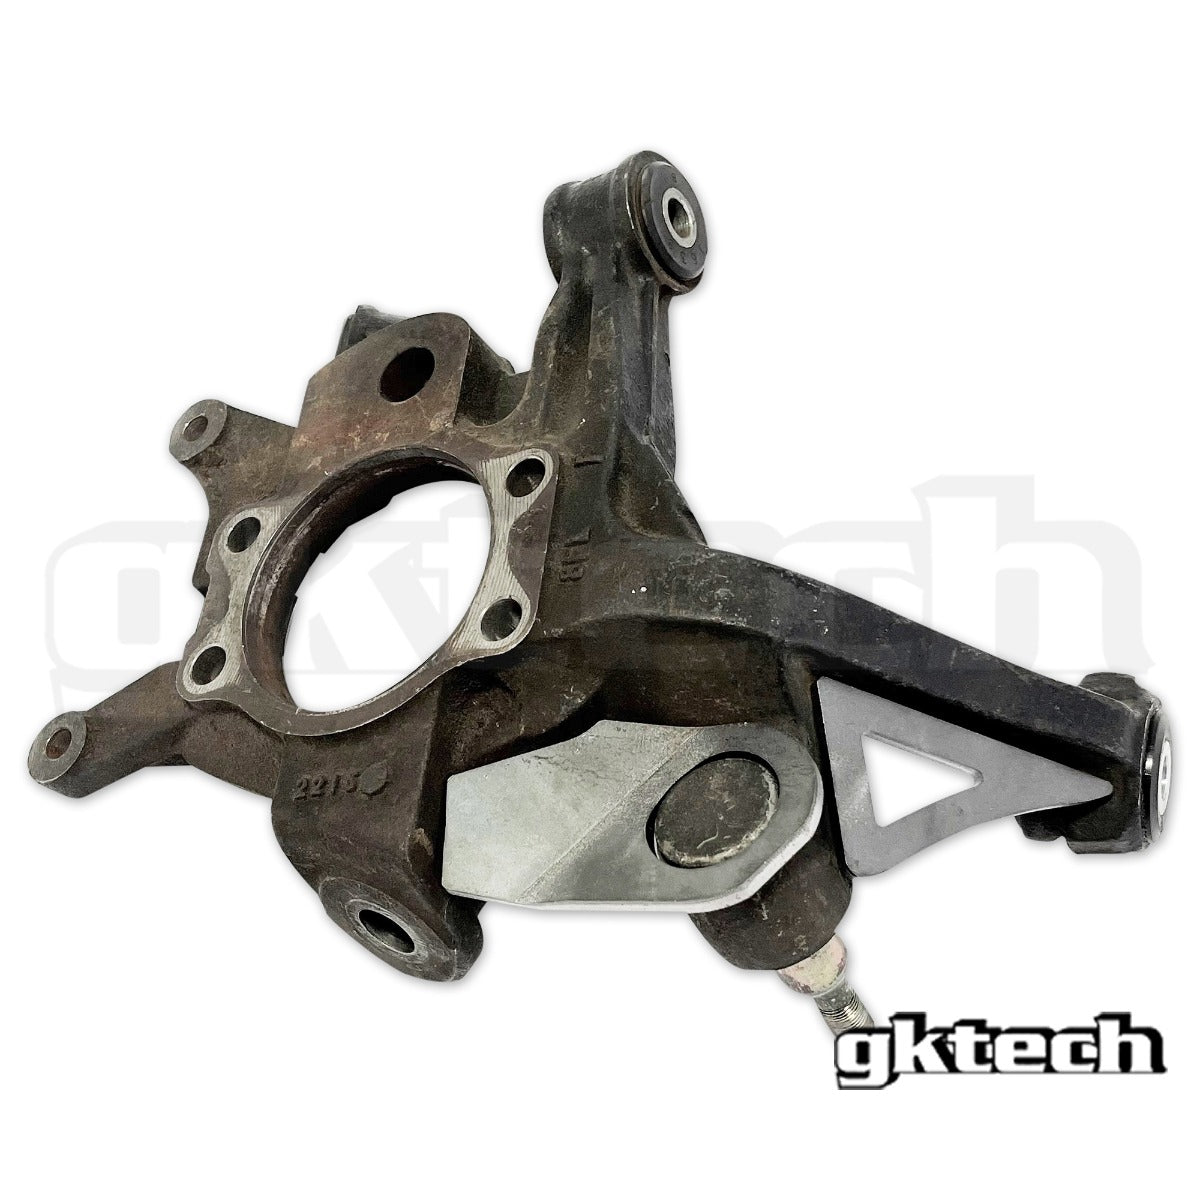 S/R Chassis Rear Knuckle Reinforcement Weld In Kit